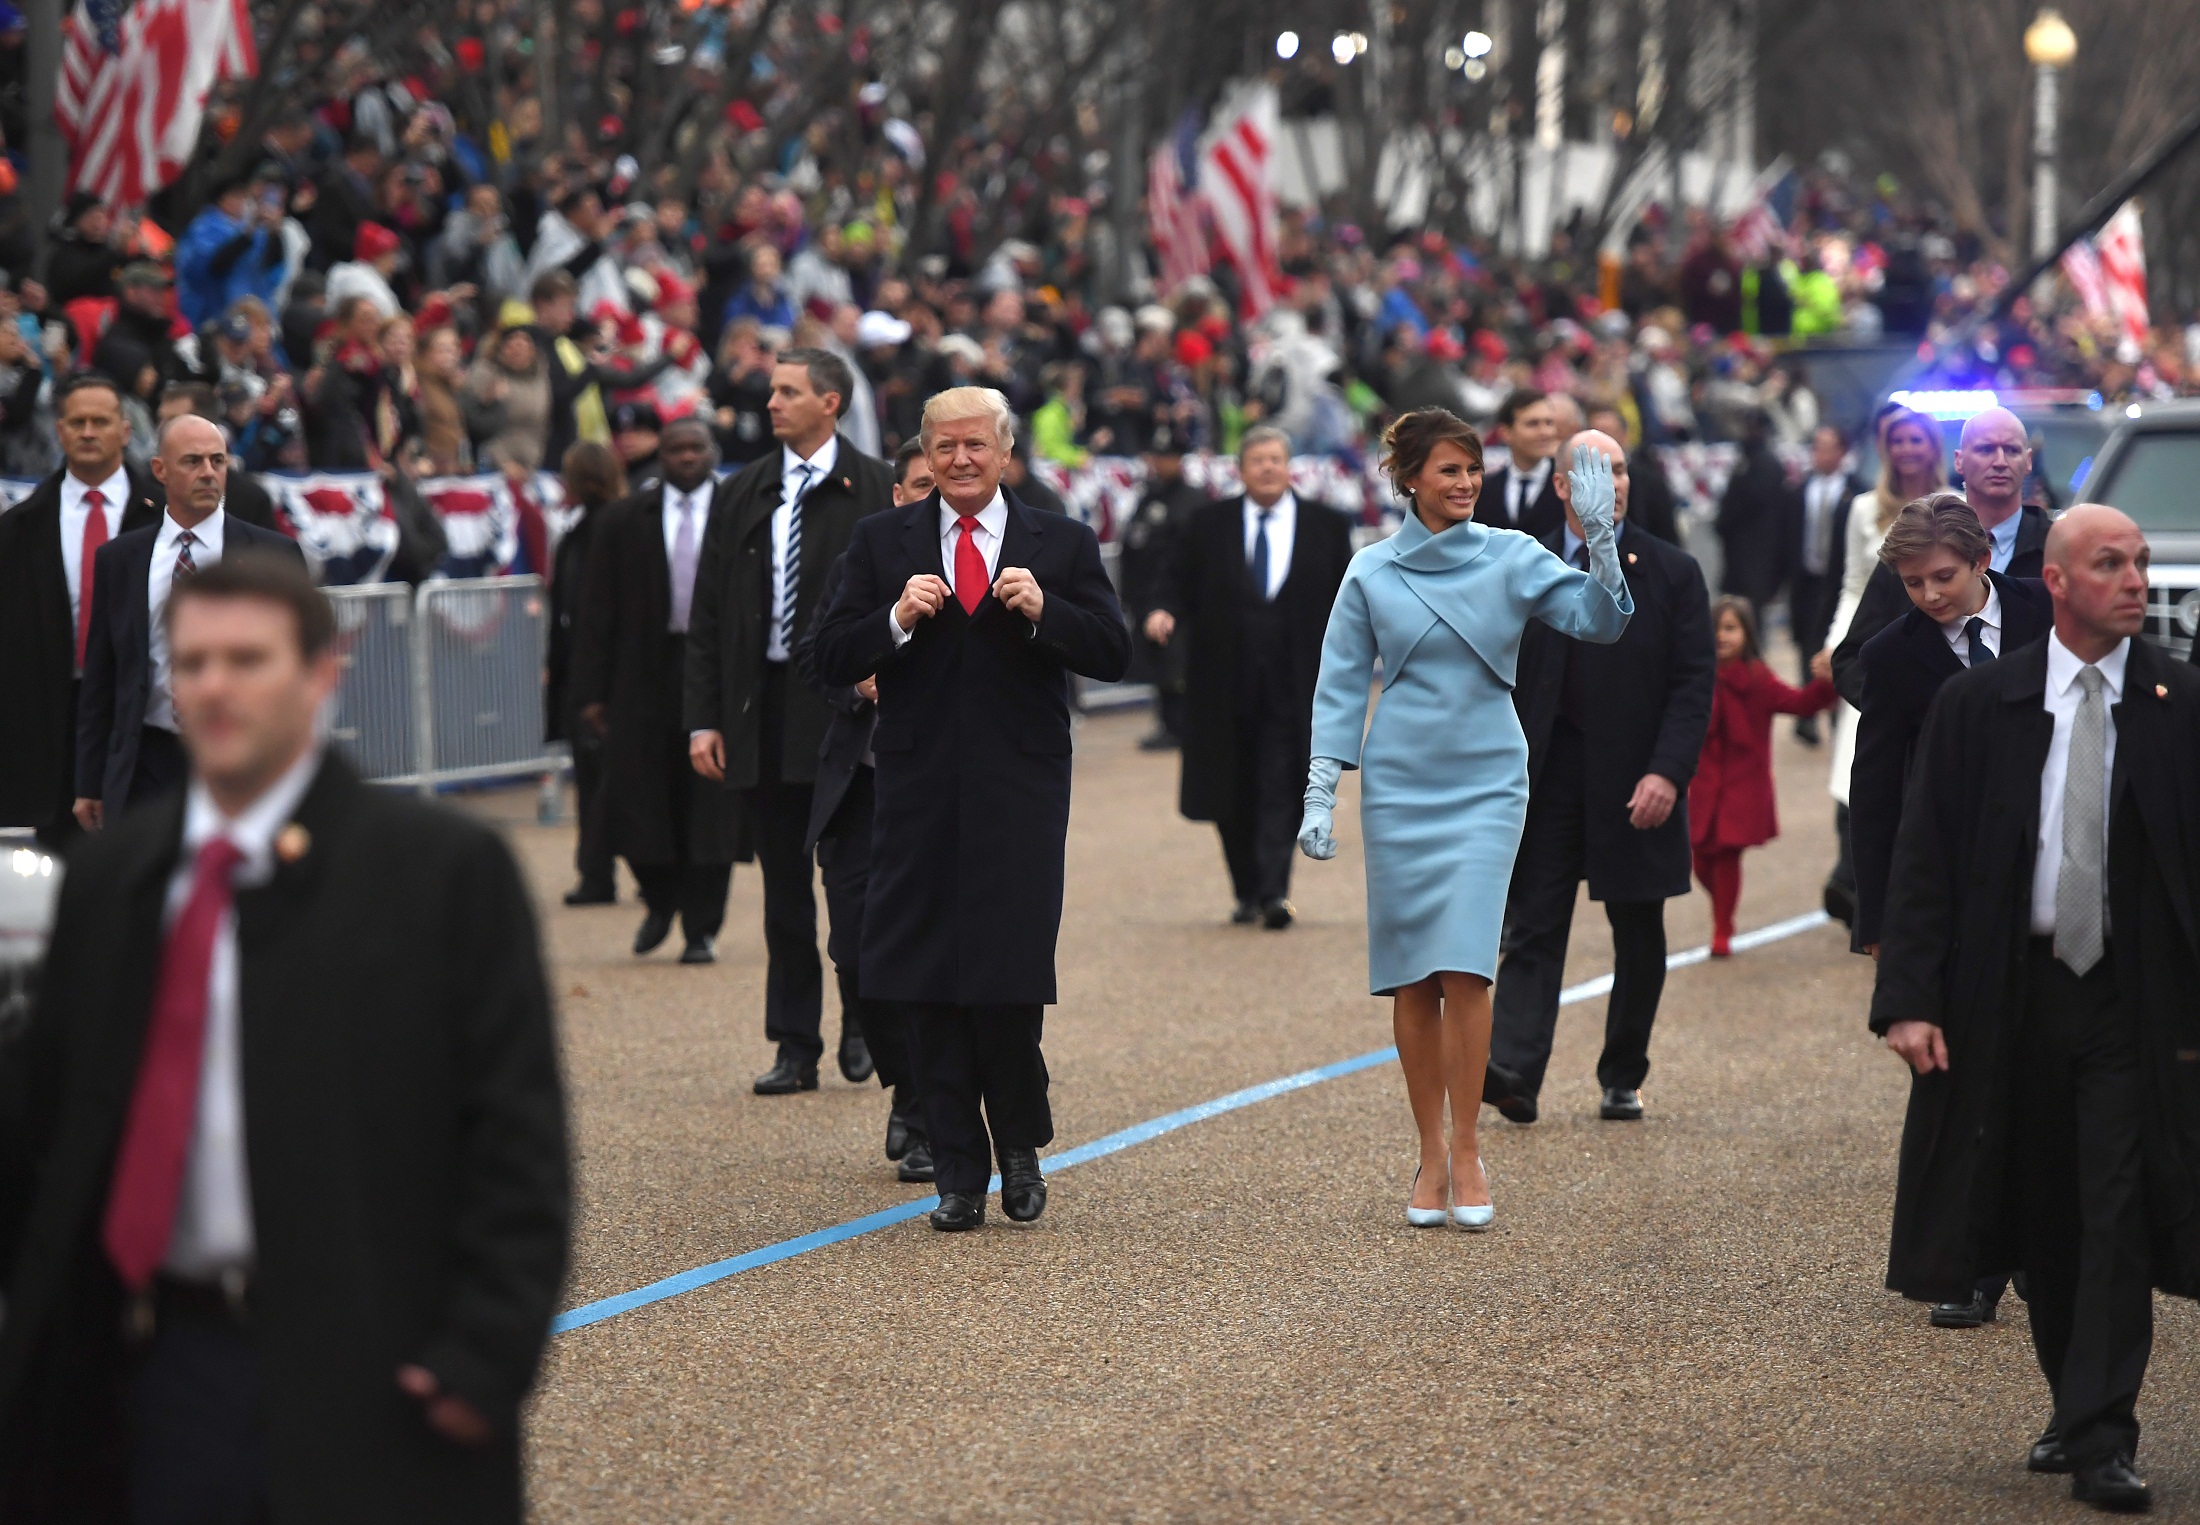 US President Donald Trump and First Lady Melania walk the inaugural parade route on Pennsylvania Avenue in Washington, DC, on January 20, 2107 following swearing-in ceremonies on Capitol Hill earlier today.  / AFP PHOTO / JIM WATSON